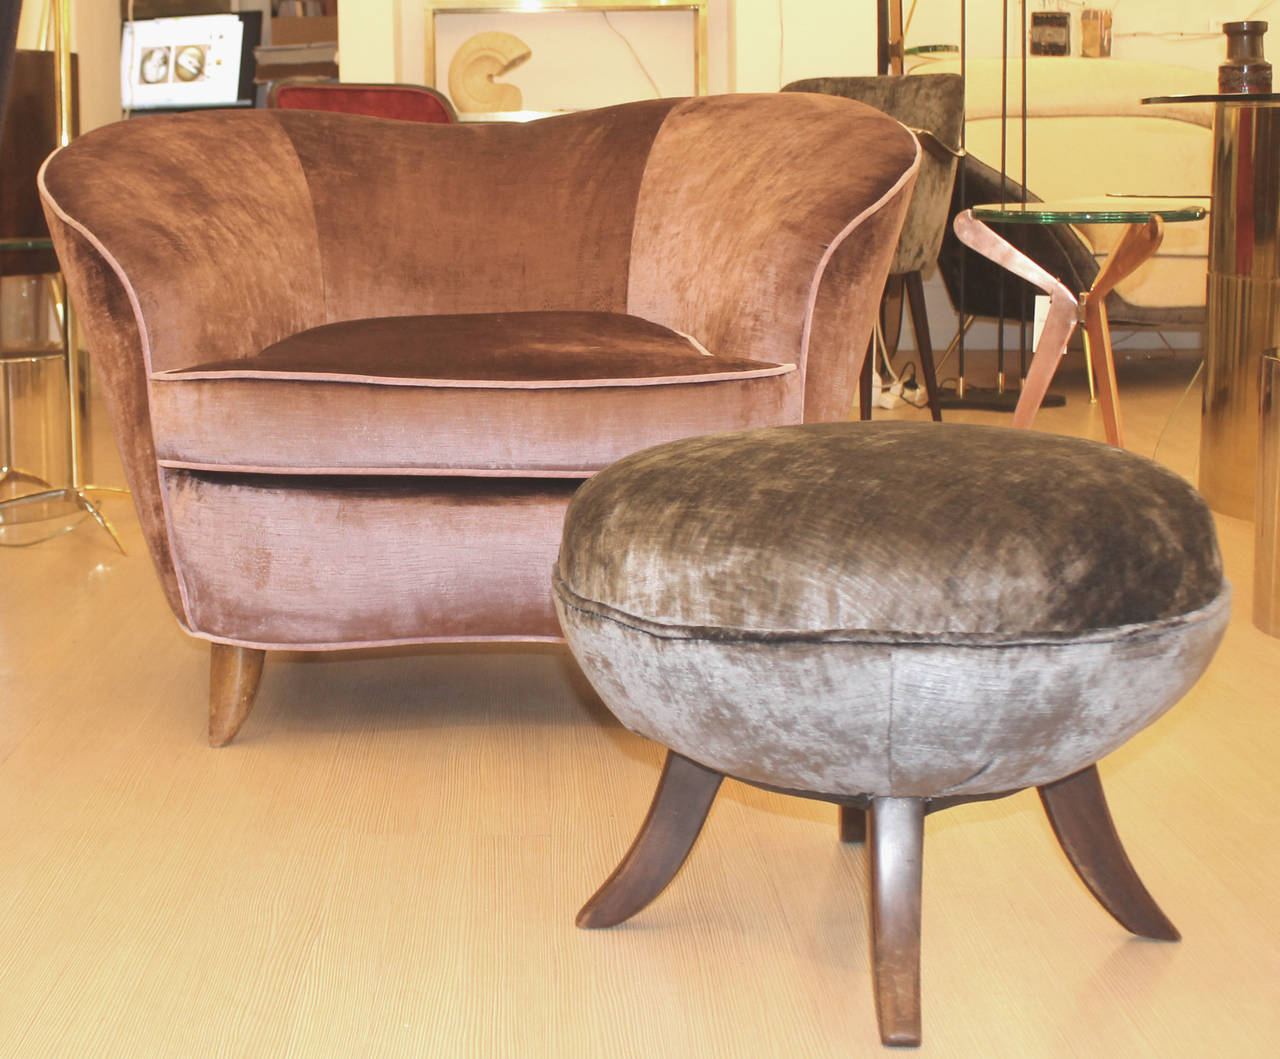 Pair of comfortable curvaceous armchairs with one round ottoman. Tapered wood legs. Legs are presently stained dark for the ottoman and light for the armchairs but can be changed as per the clients preference. One armchair has been re-upholstered